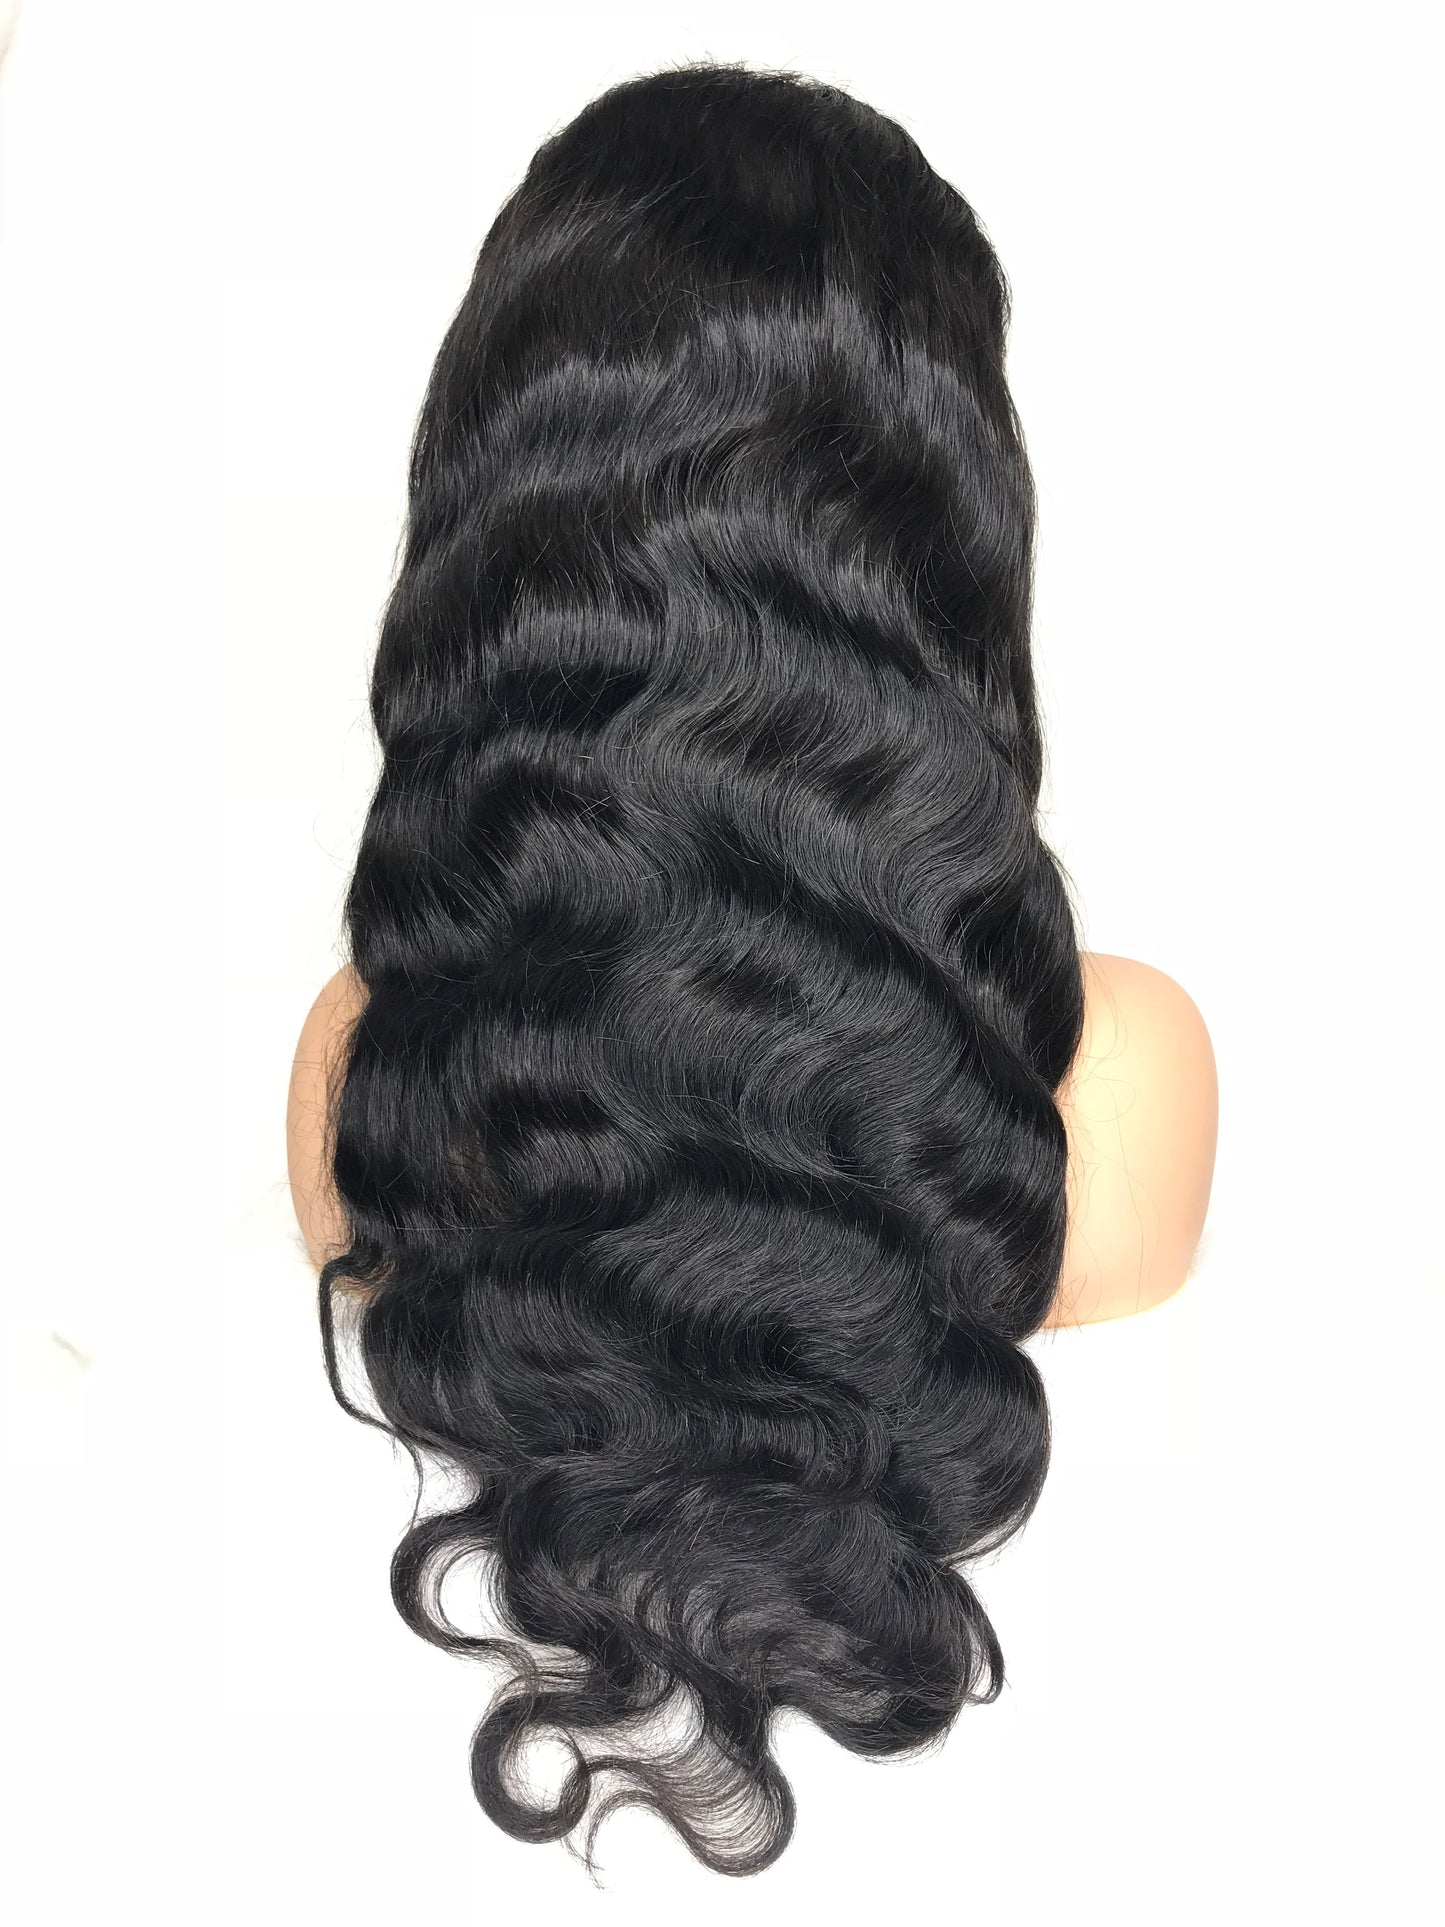 Load image into Gallery viewer, 8A Malaysian Body Wave Lace Frontal Human Hair Wig - eHair Outlet
